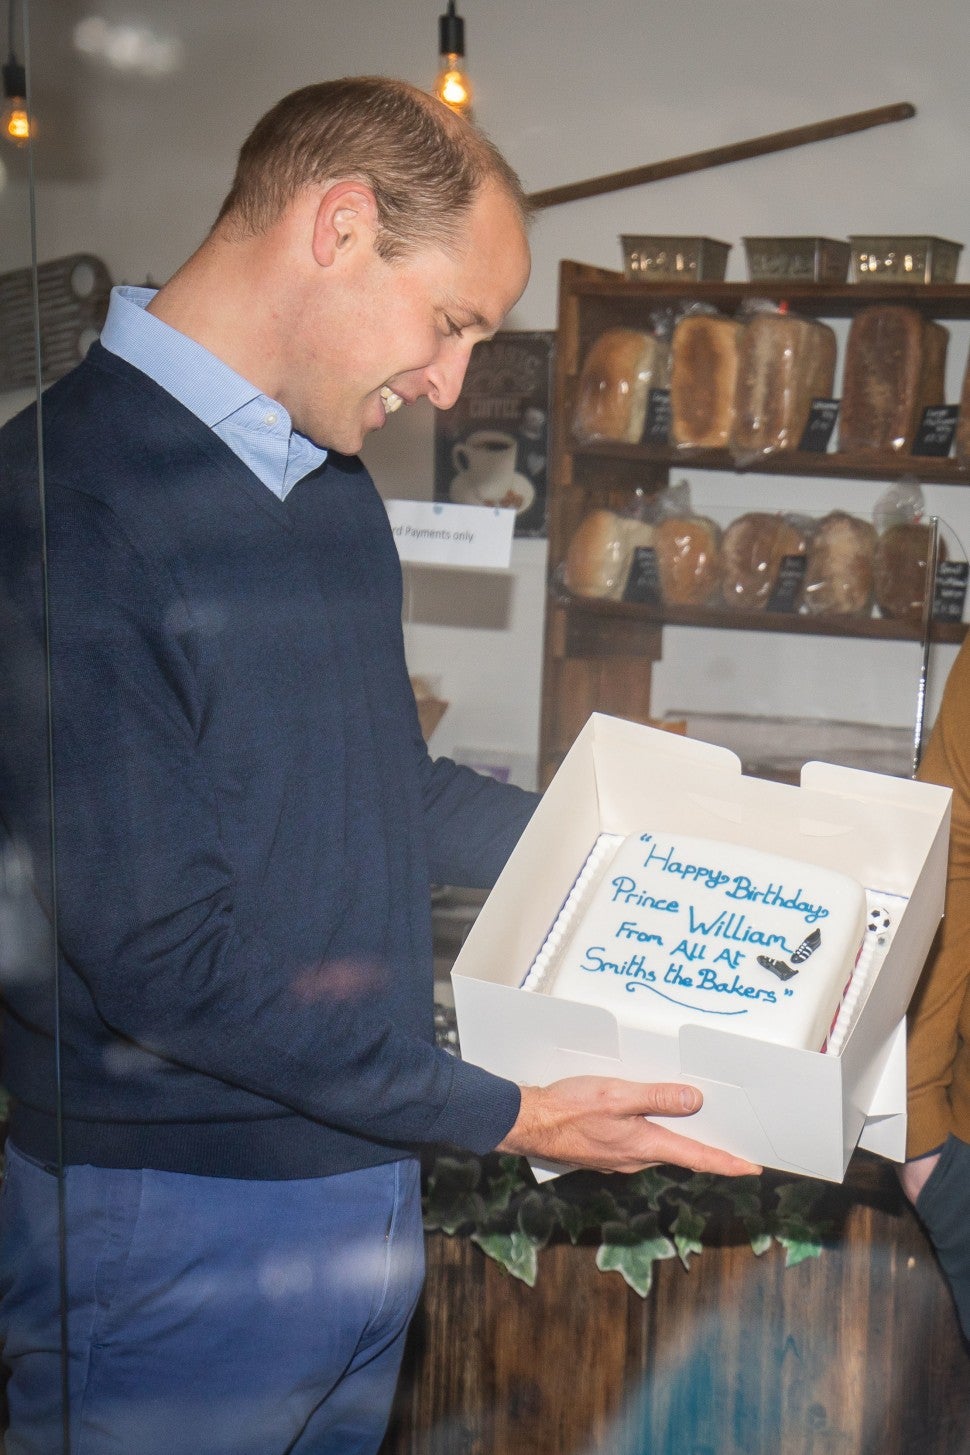 Prince William, Duke of Cambridge is presented with a birthday cake